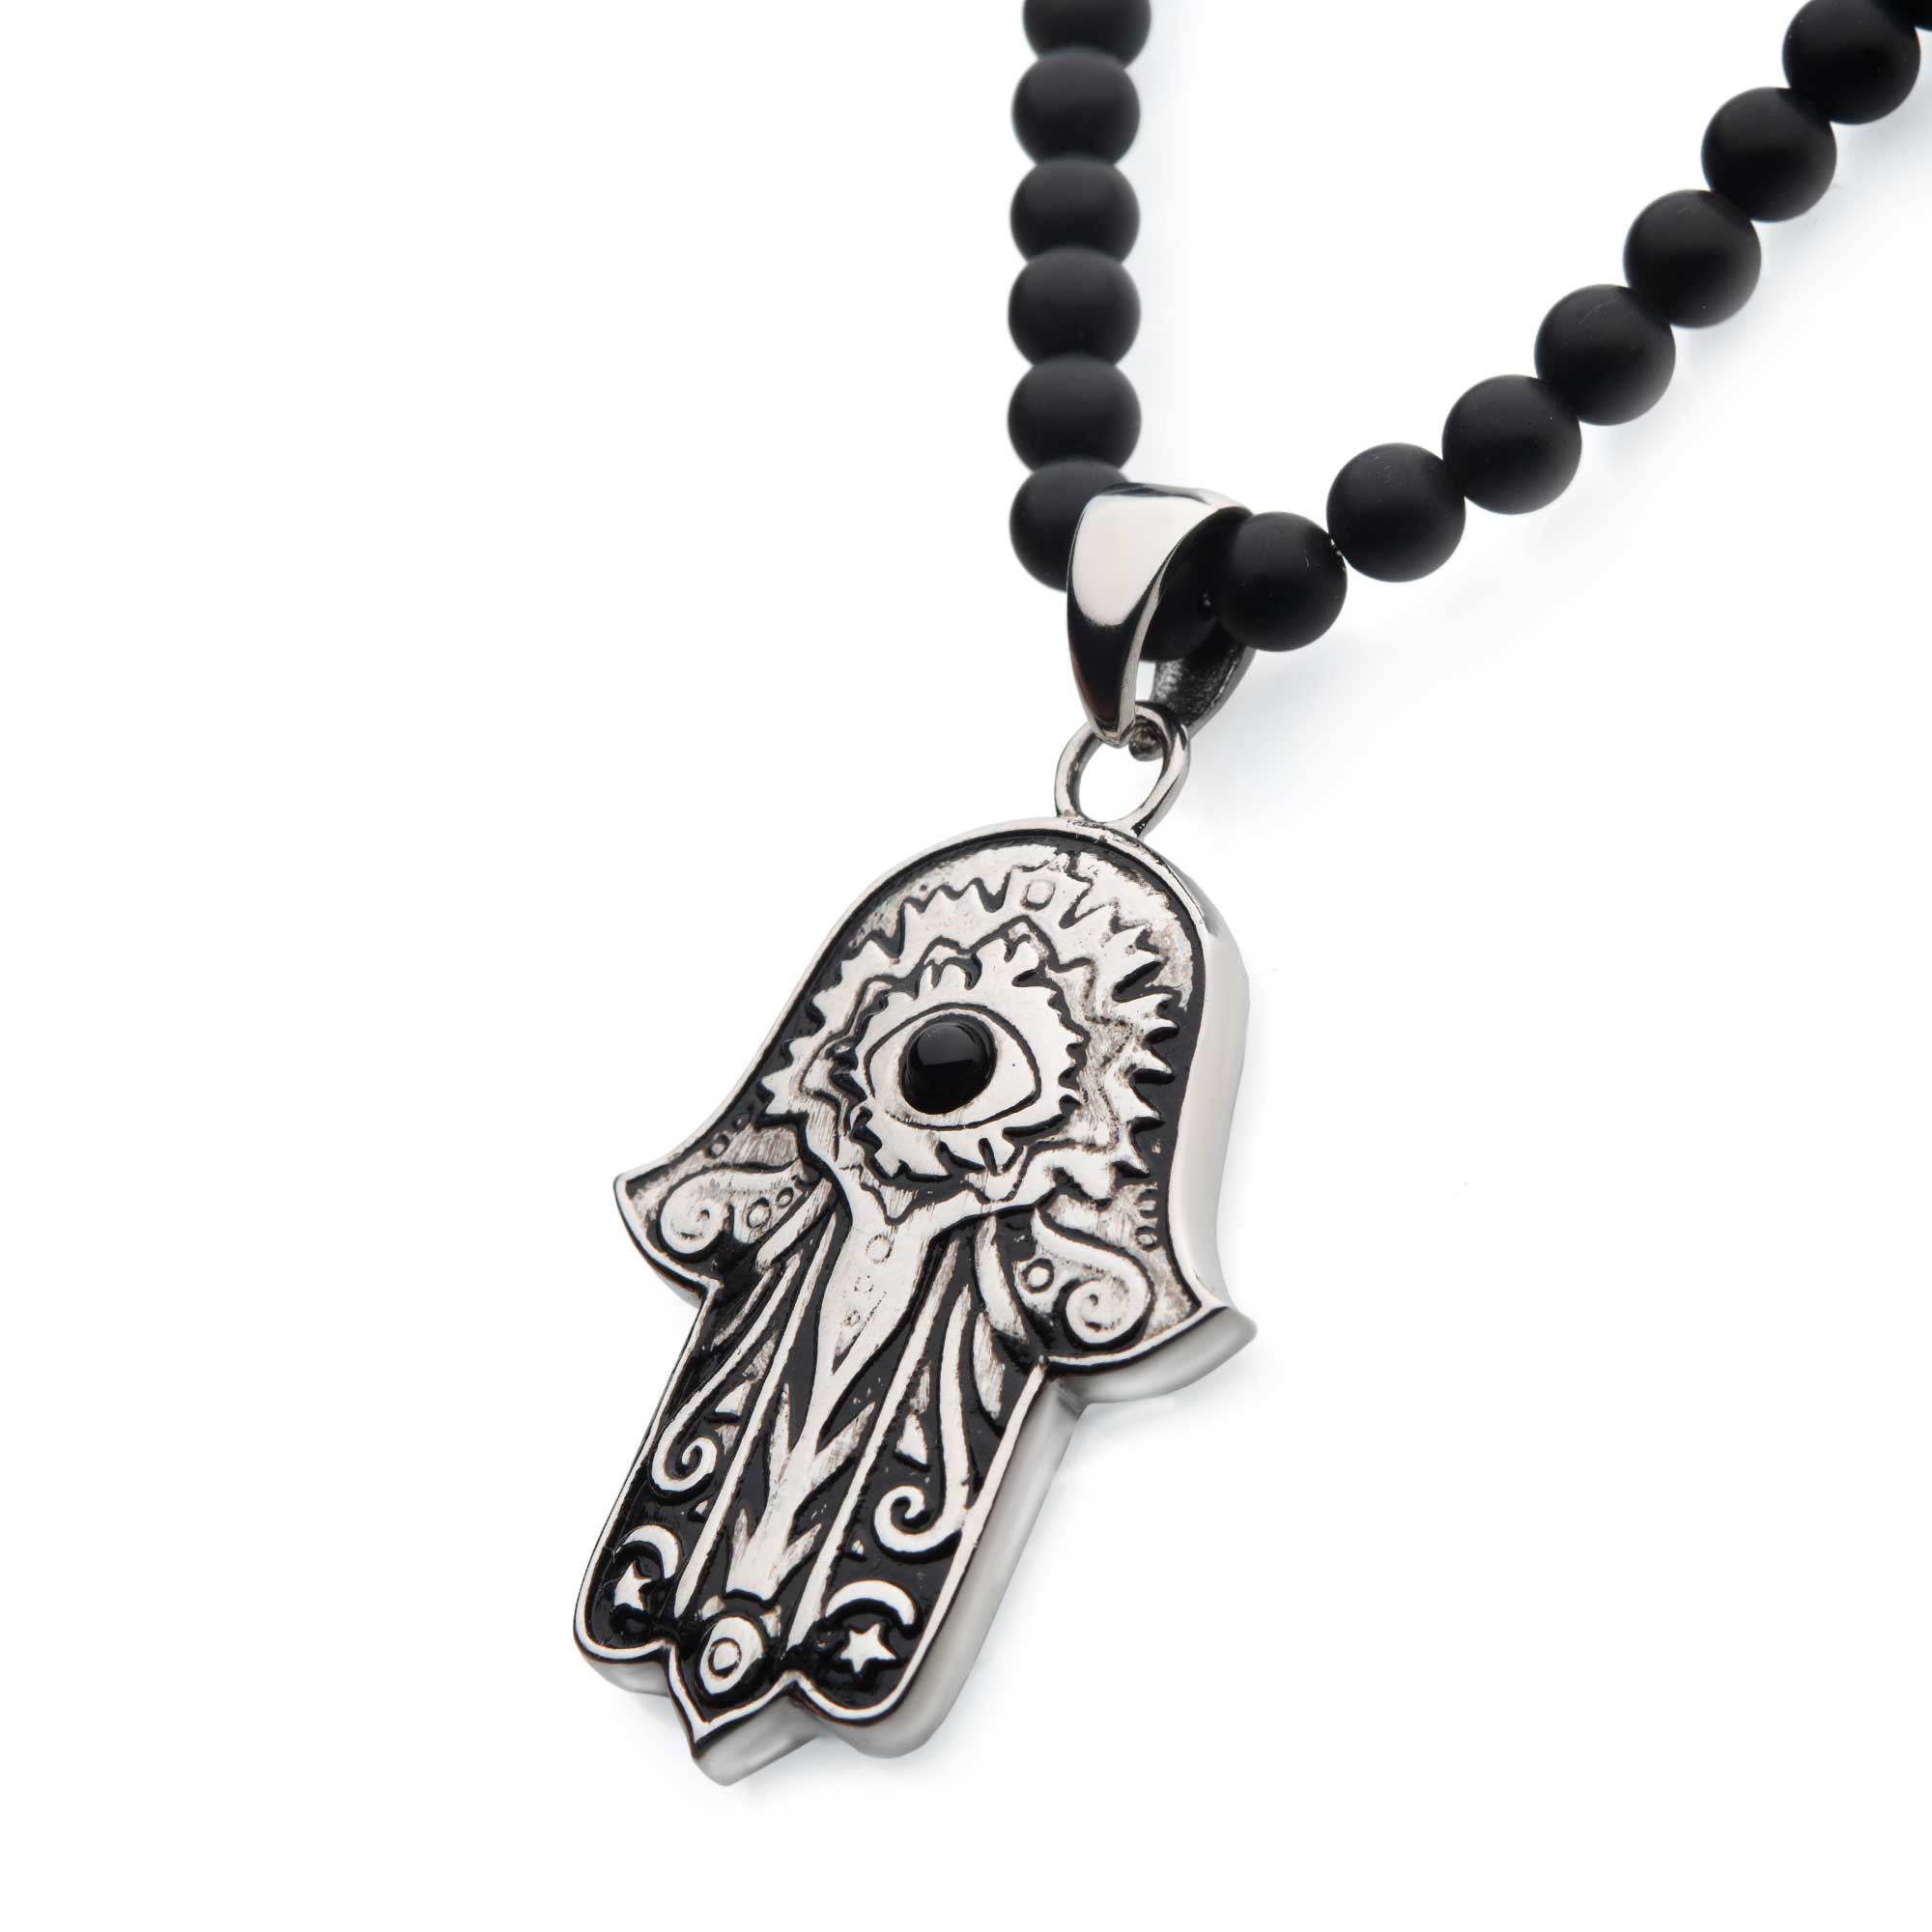 Stainless Steel with Centerpiece Black Agate Stone Hamsa Pendant, with Black Agate Stone Bead Necklace Image 2 Enchanted Jewelry Plainfield, CT